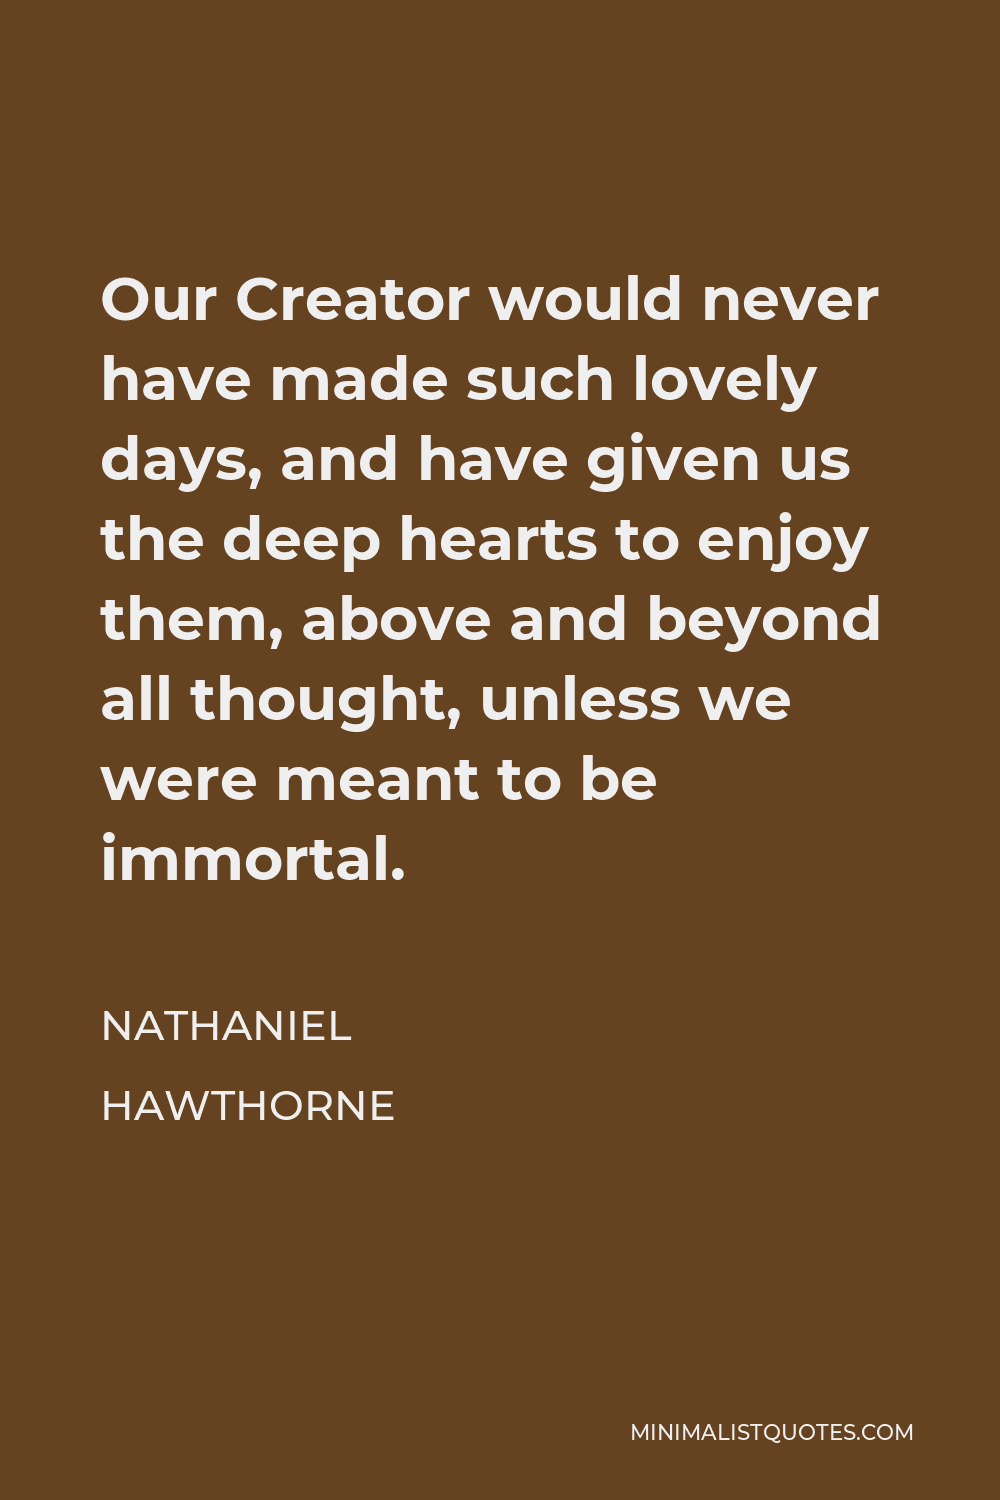 Nathaniel Hawthorne Quote - Our Creator would never have made such lovely days, and have given us the deep hearts to enjoy them, above and beyond all thought, unless we were meant to be immortal.